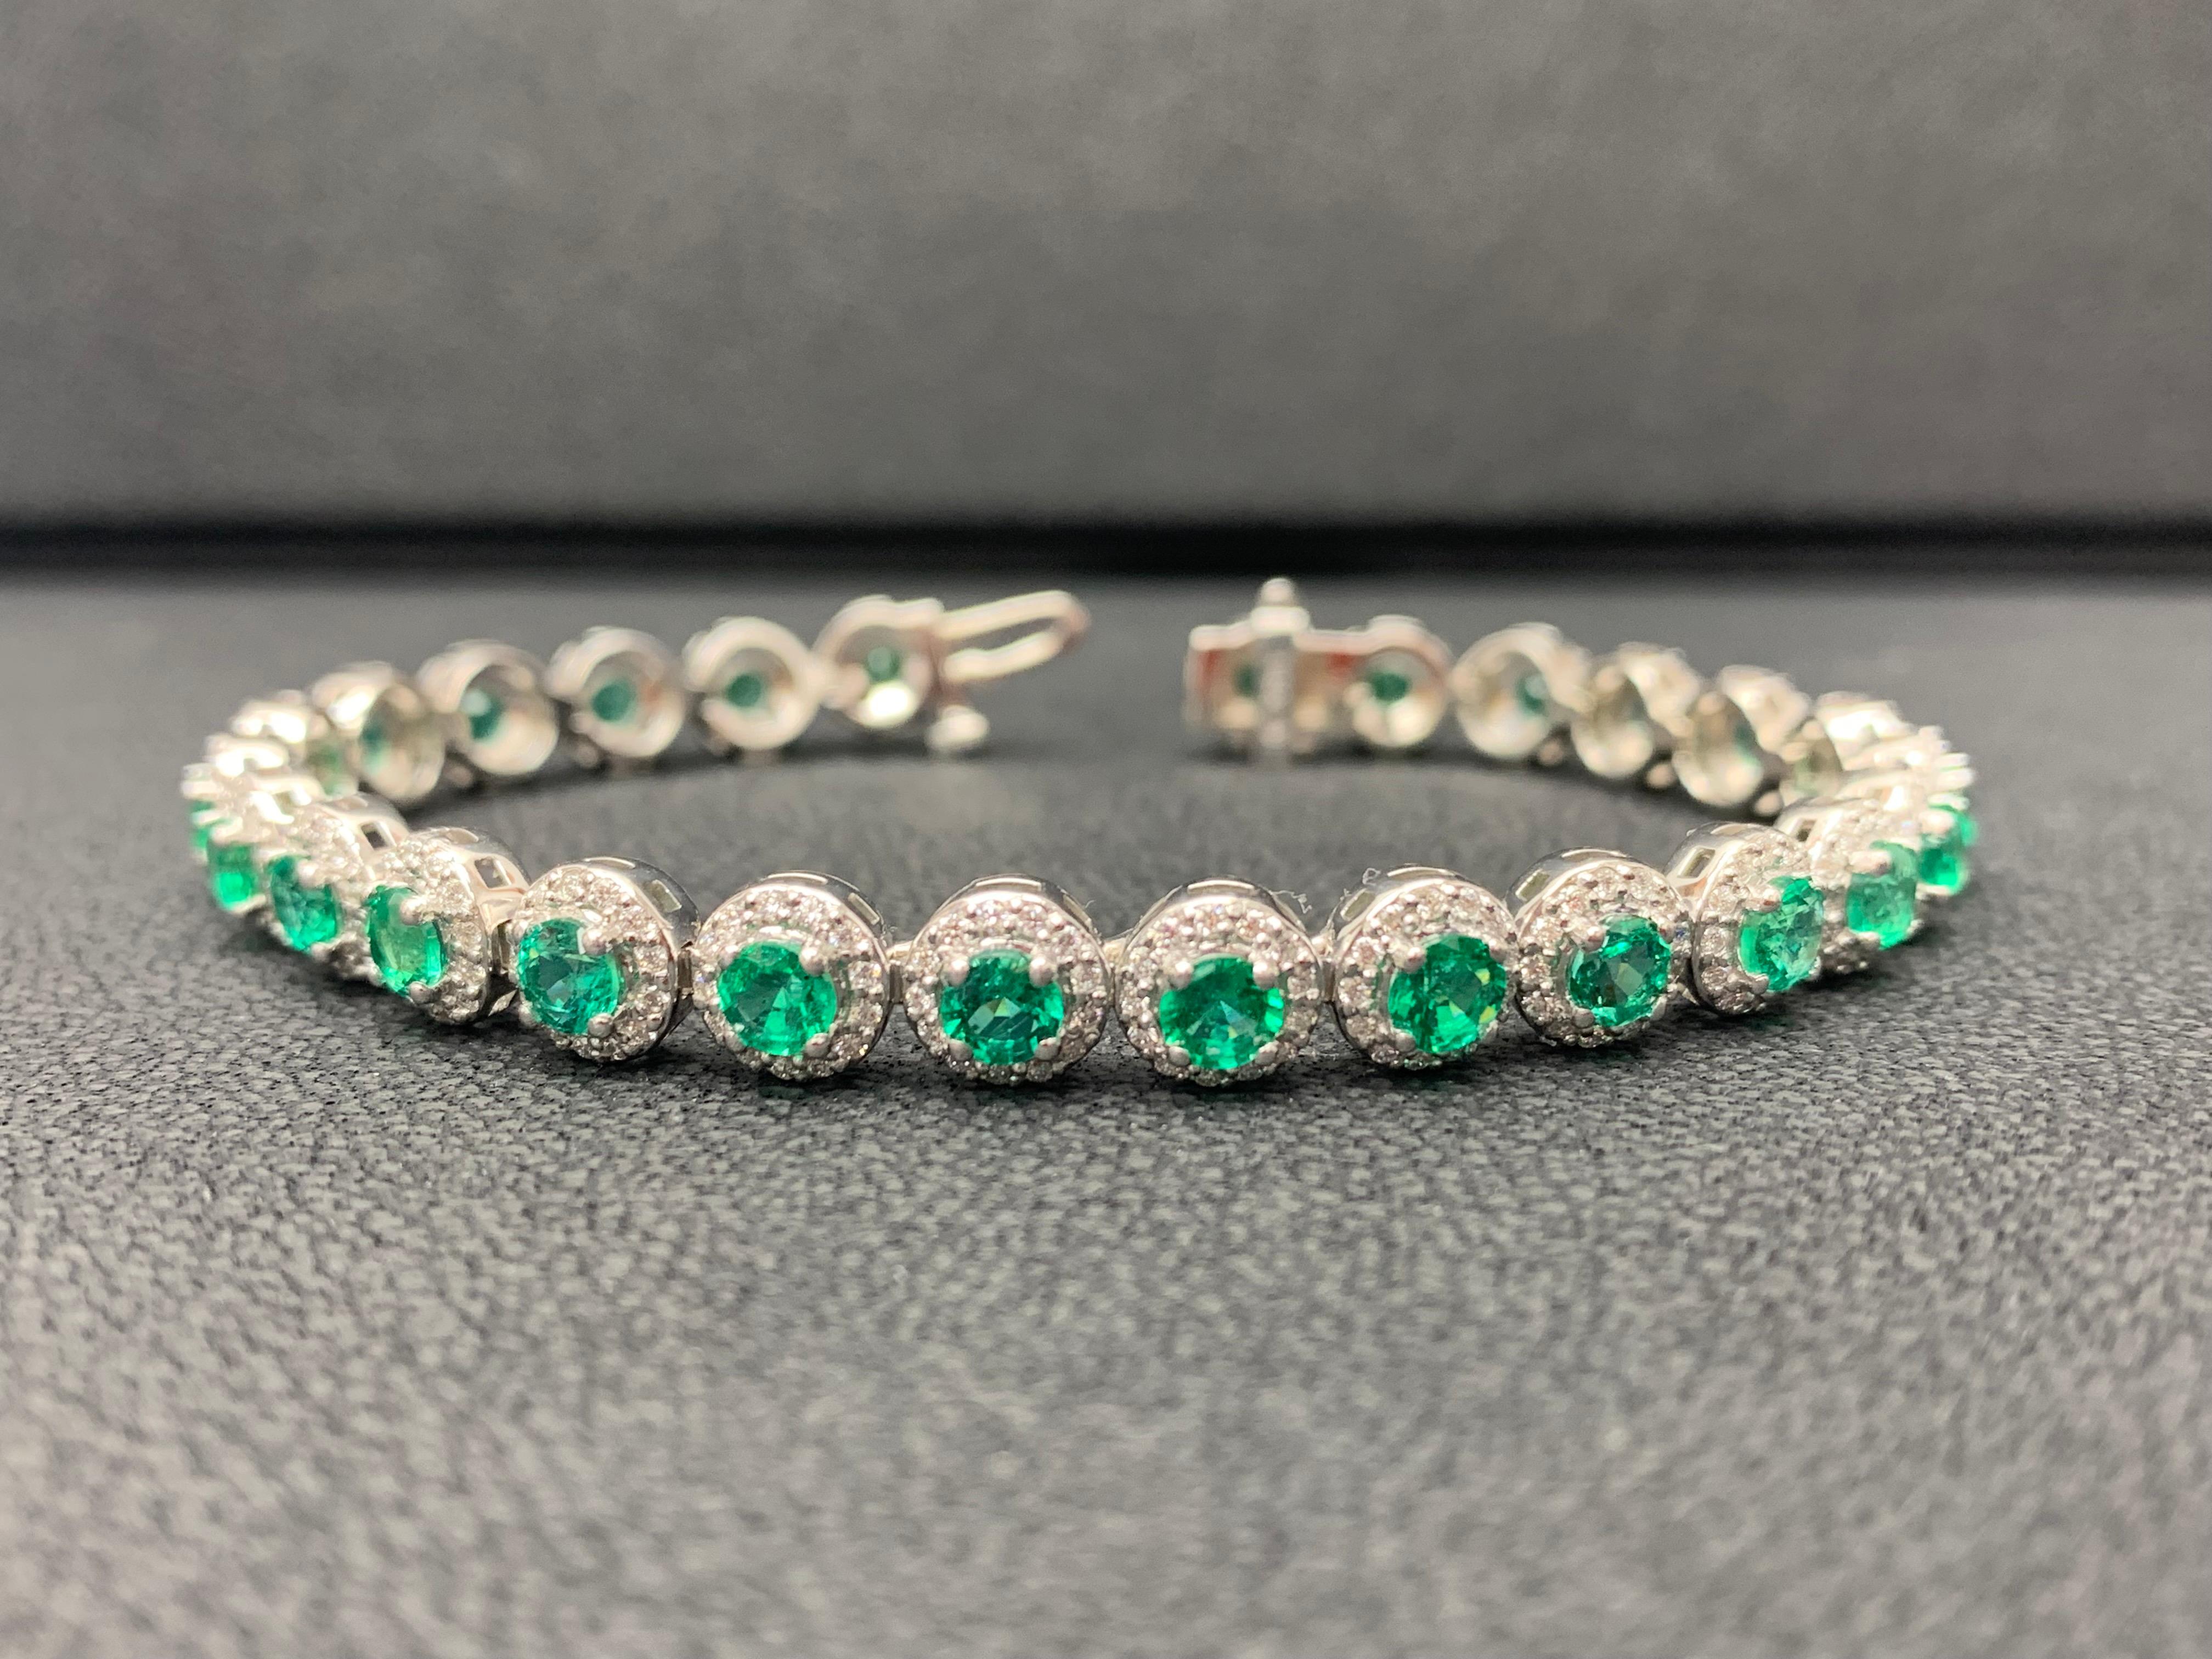 Add color to your style with this gorgeous Emerald bracelet. Features 26 Round cut Emeralds surrounded by a single row of sparkling round diamonds in a halo setting. Emeralds and diamonds weigh 5.88 carats and 1.43 carats total respectively. Made in